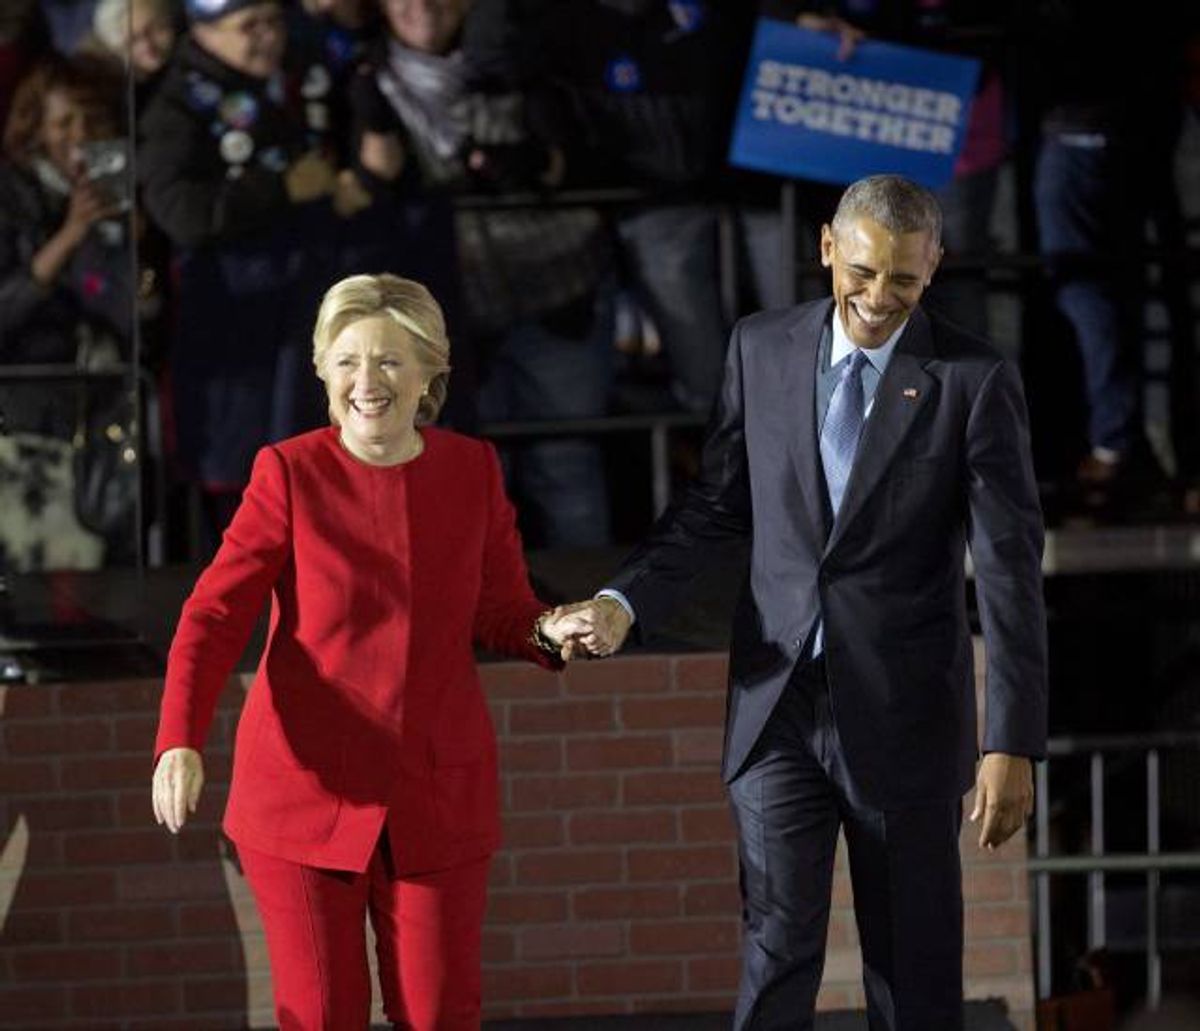 President Barack Obama and Democratic presidential candidate Hillary Clinton hold hands as they walk off stage after both spoke at a rally at Independence Mall in Philadelphia. Monday, Nov. 7, 2016 (AP Photo/Pablo Martinez Monsivais)